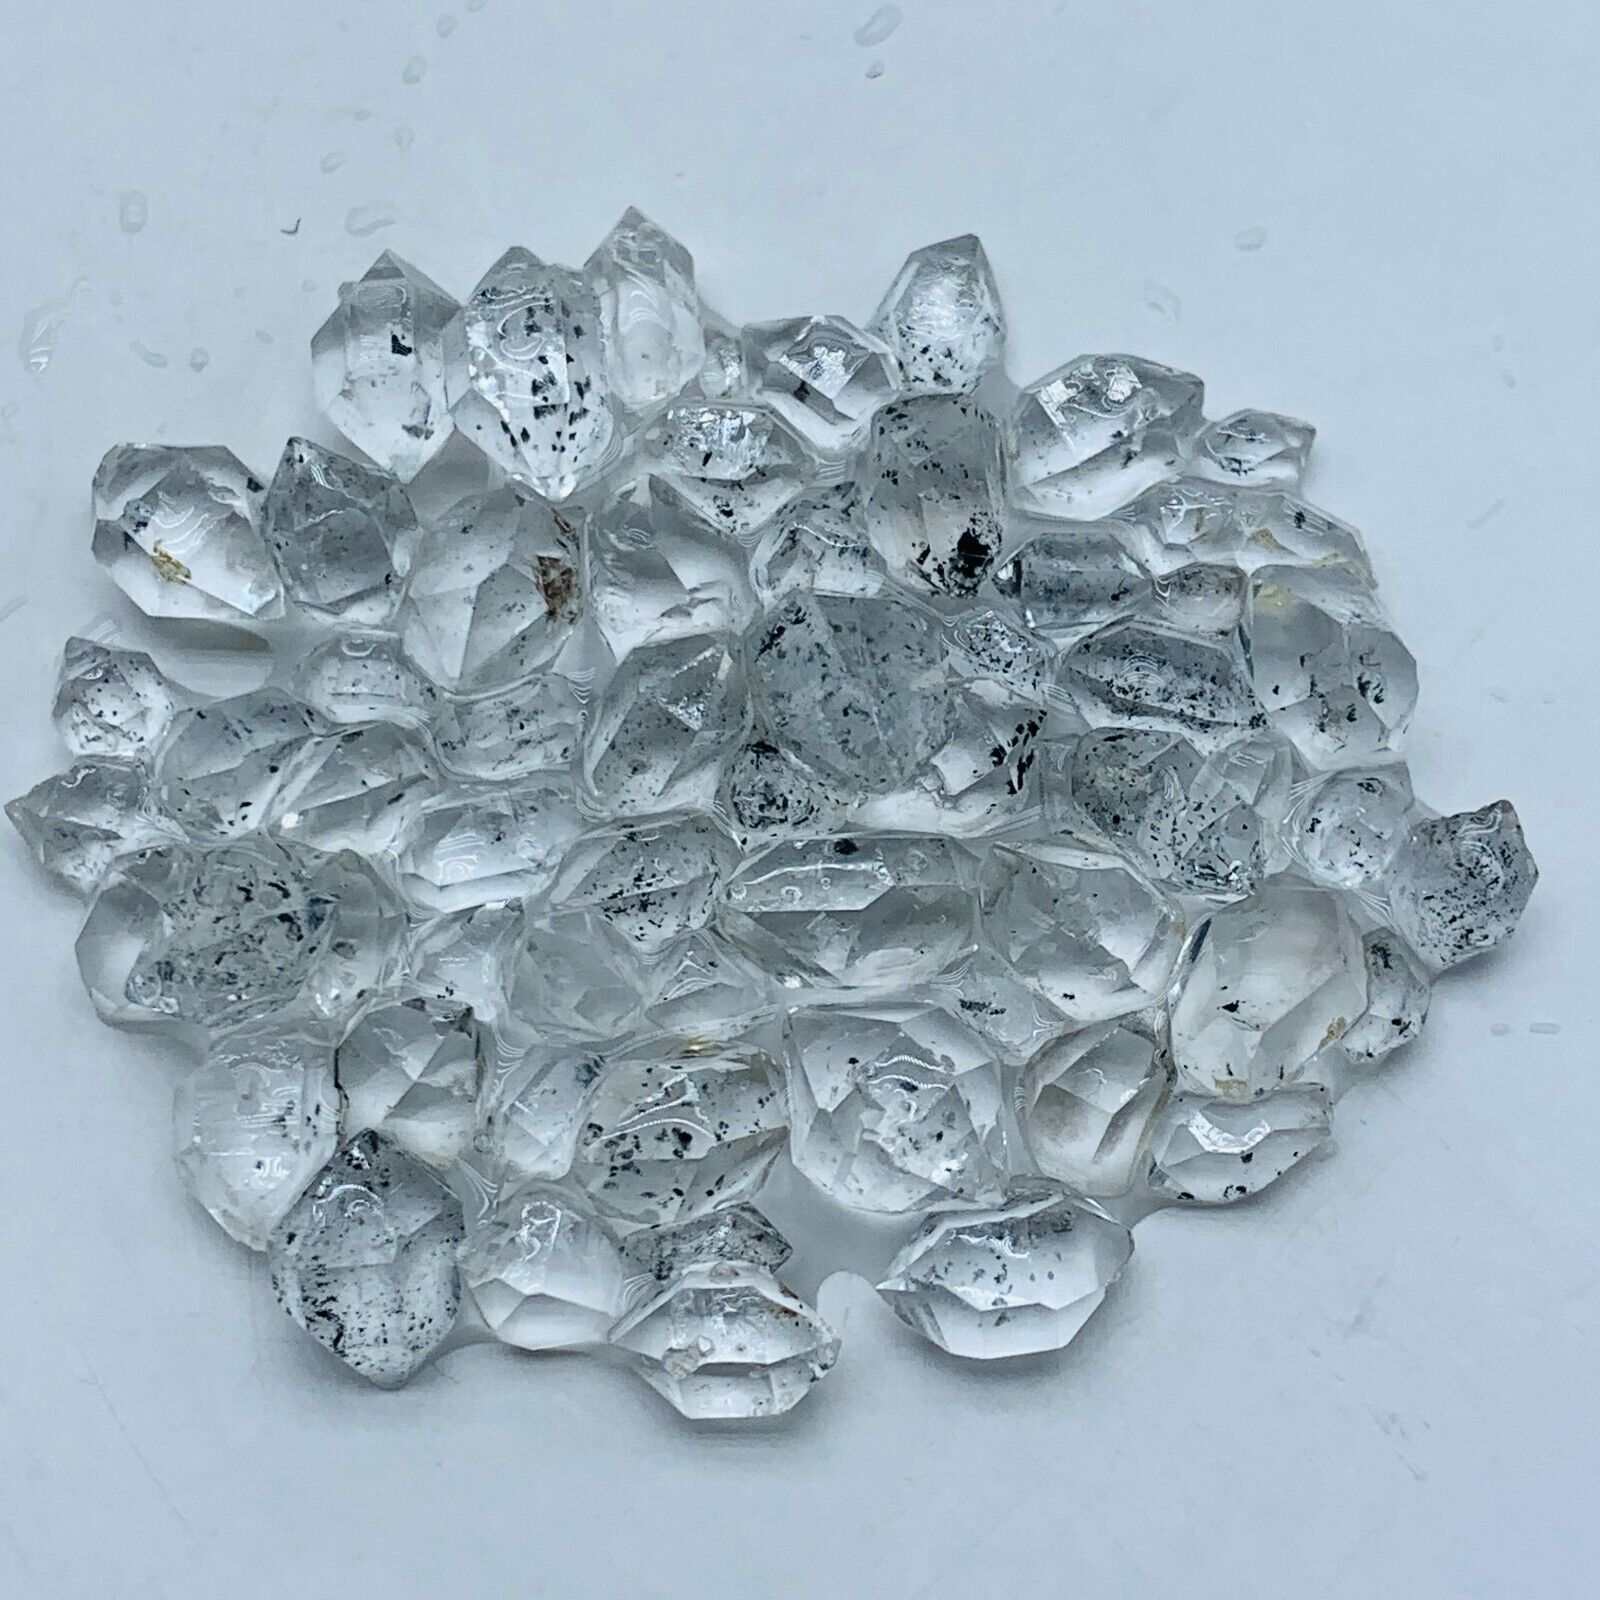 64pc Herkimer Diamond AAA small 4mm to 10mm Top gem crystal From-NY 50ct